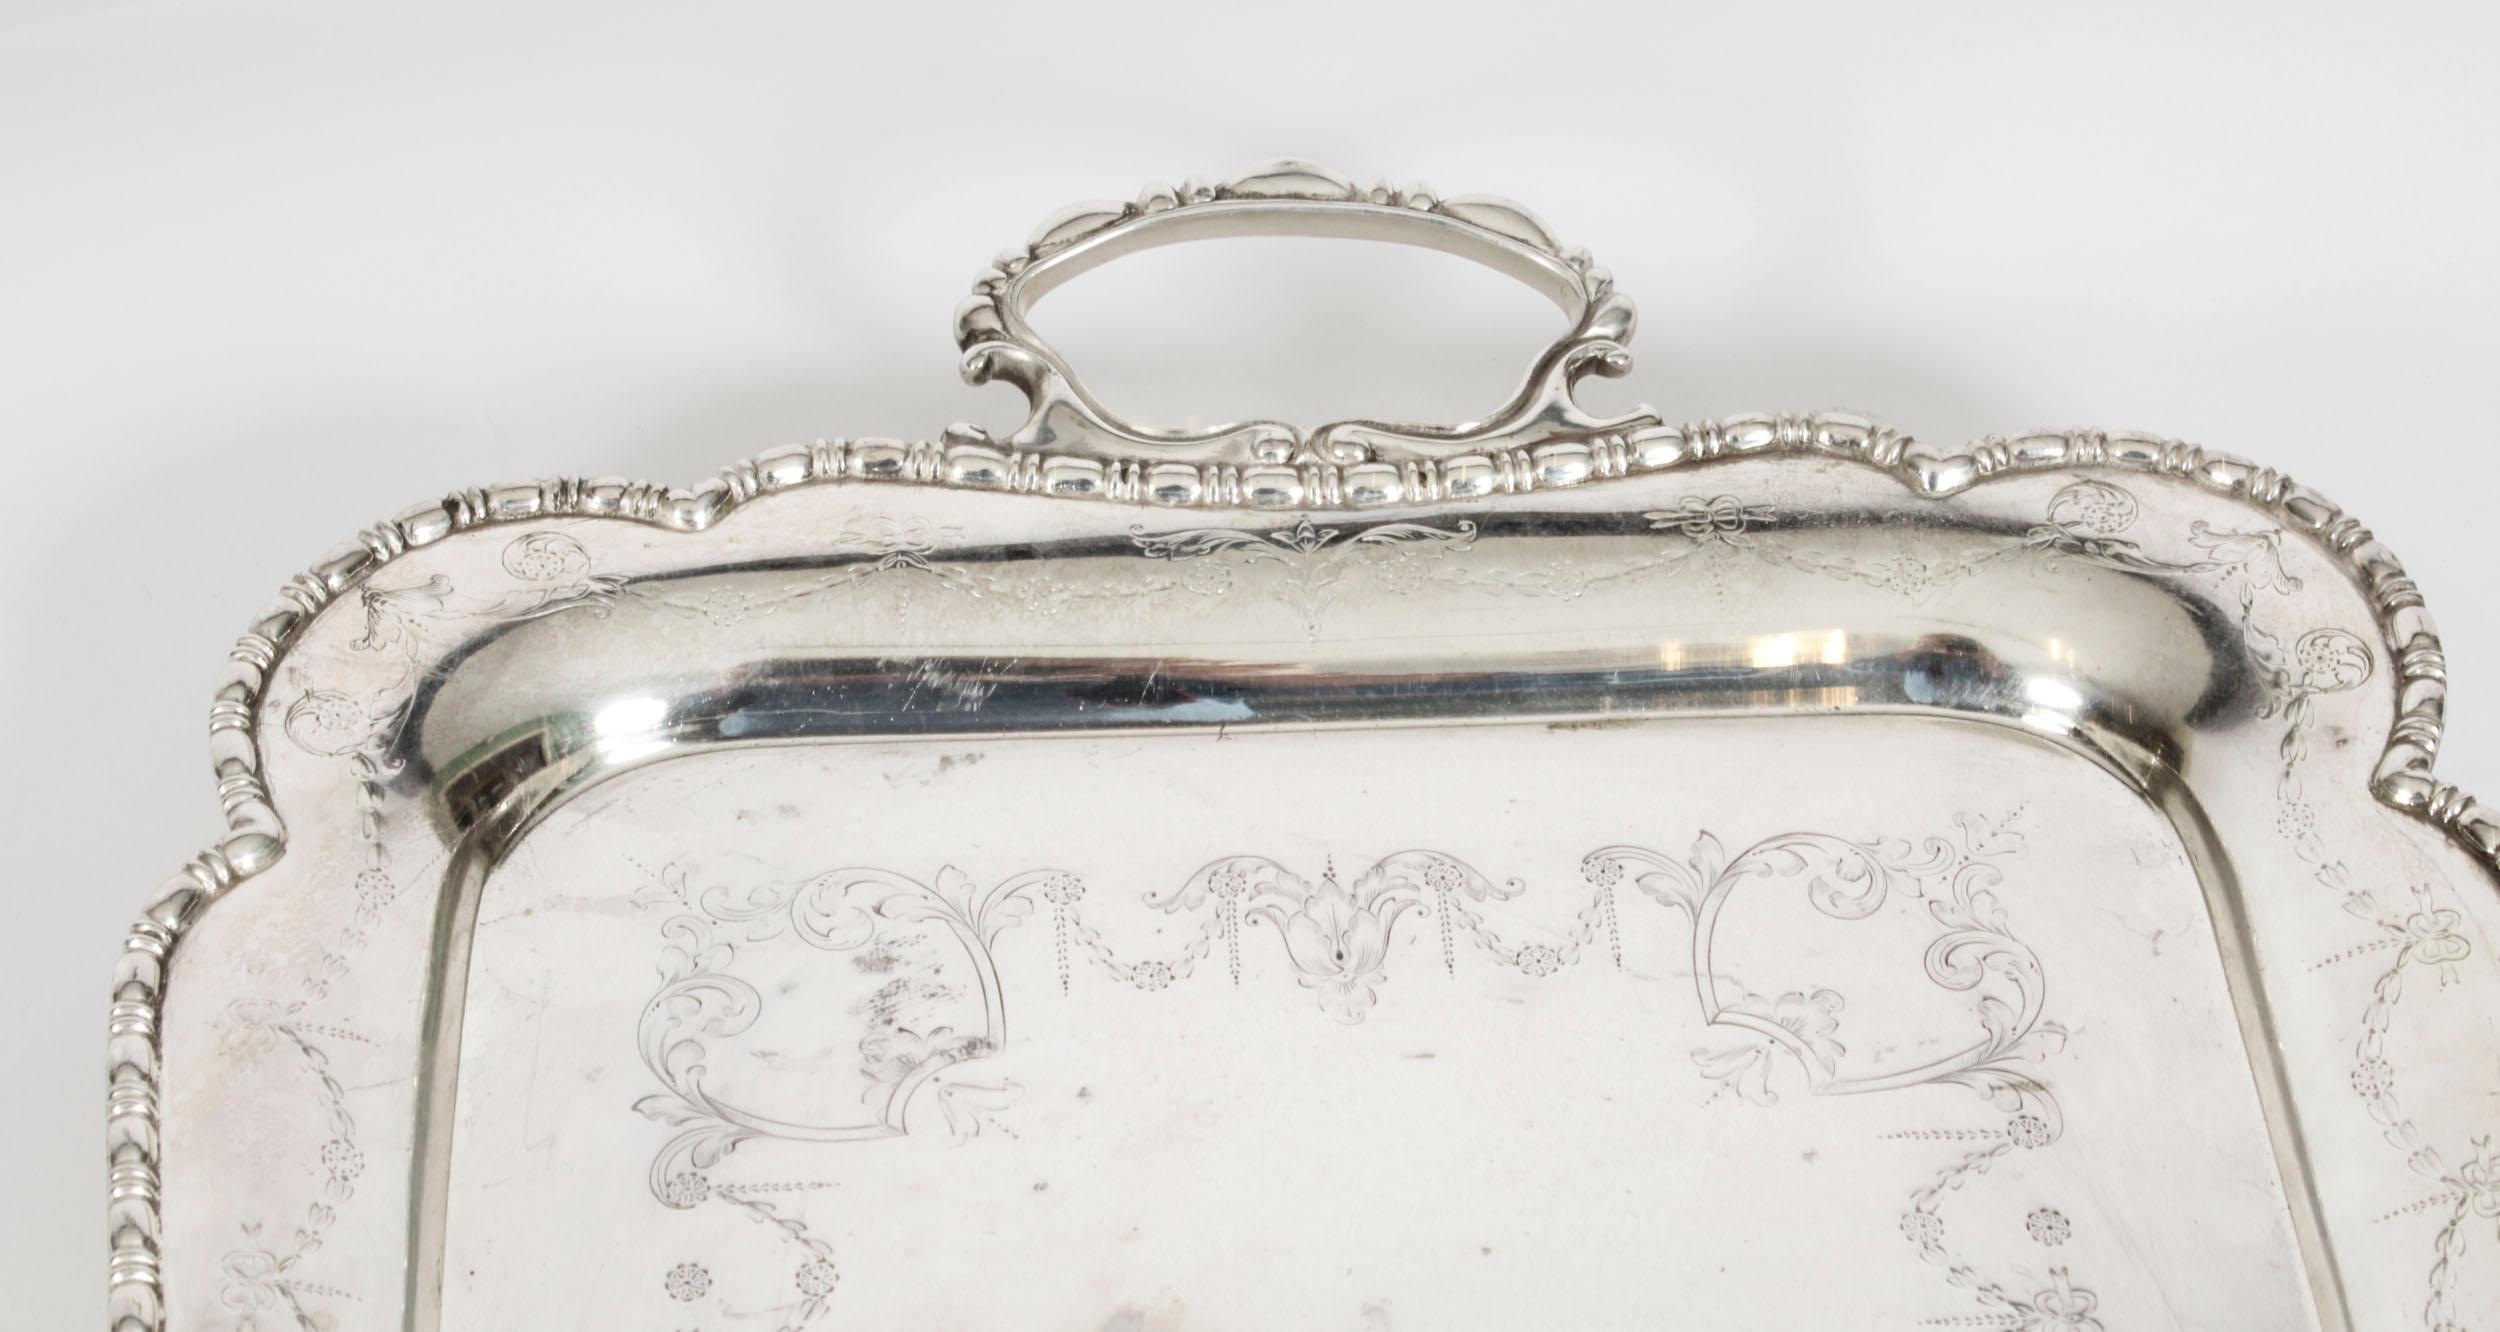 This is a superb antique English neoclassical silver plated tray by the renowned English silversmith, James Deakin, circa 1870 in date.
 
This rectangular tray features a deep set, decorative gadrooned border with elegant handles decorated with